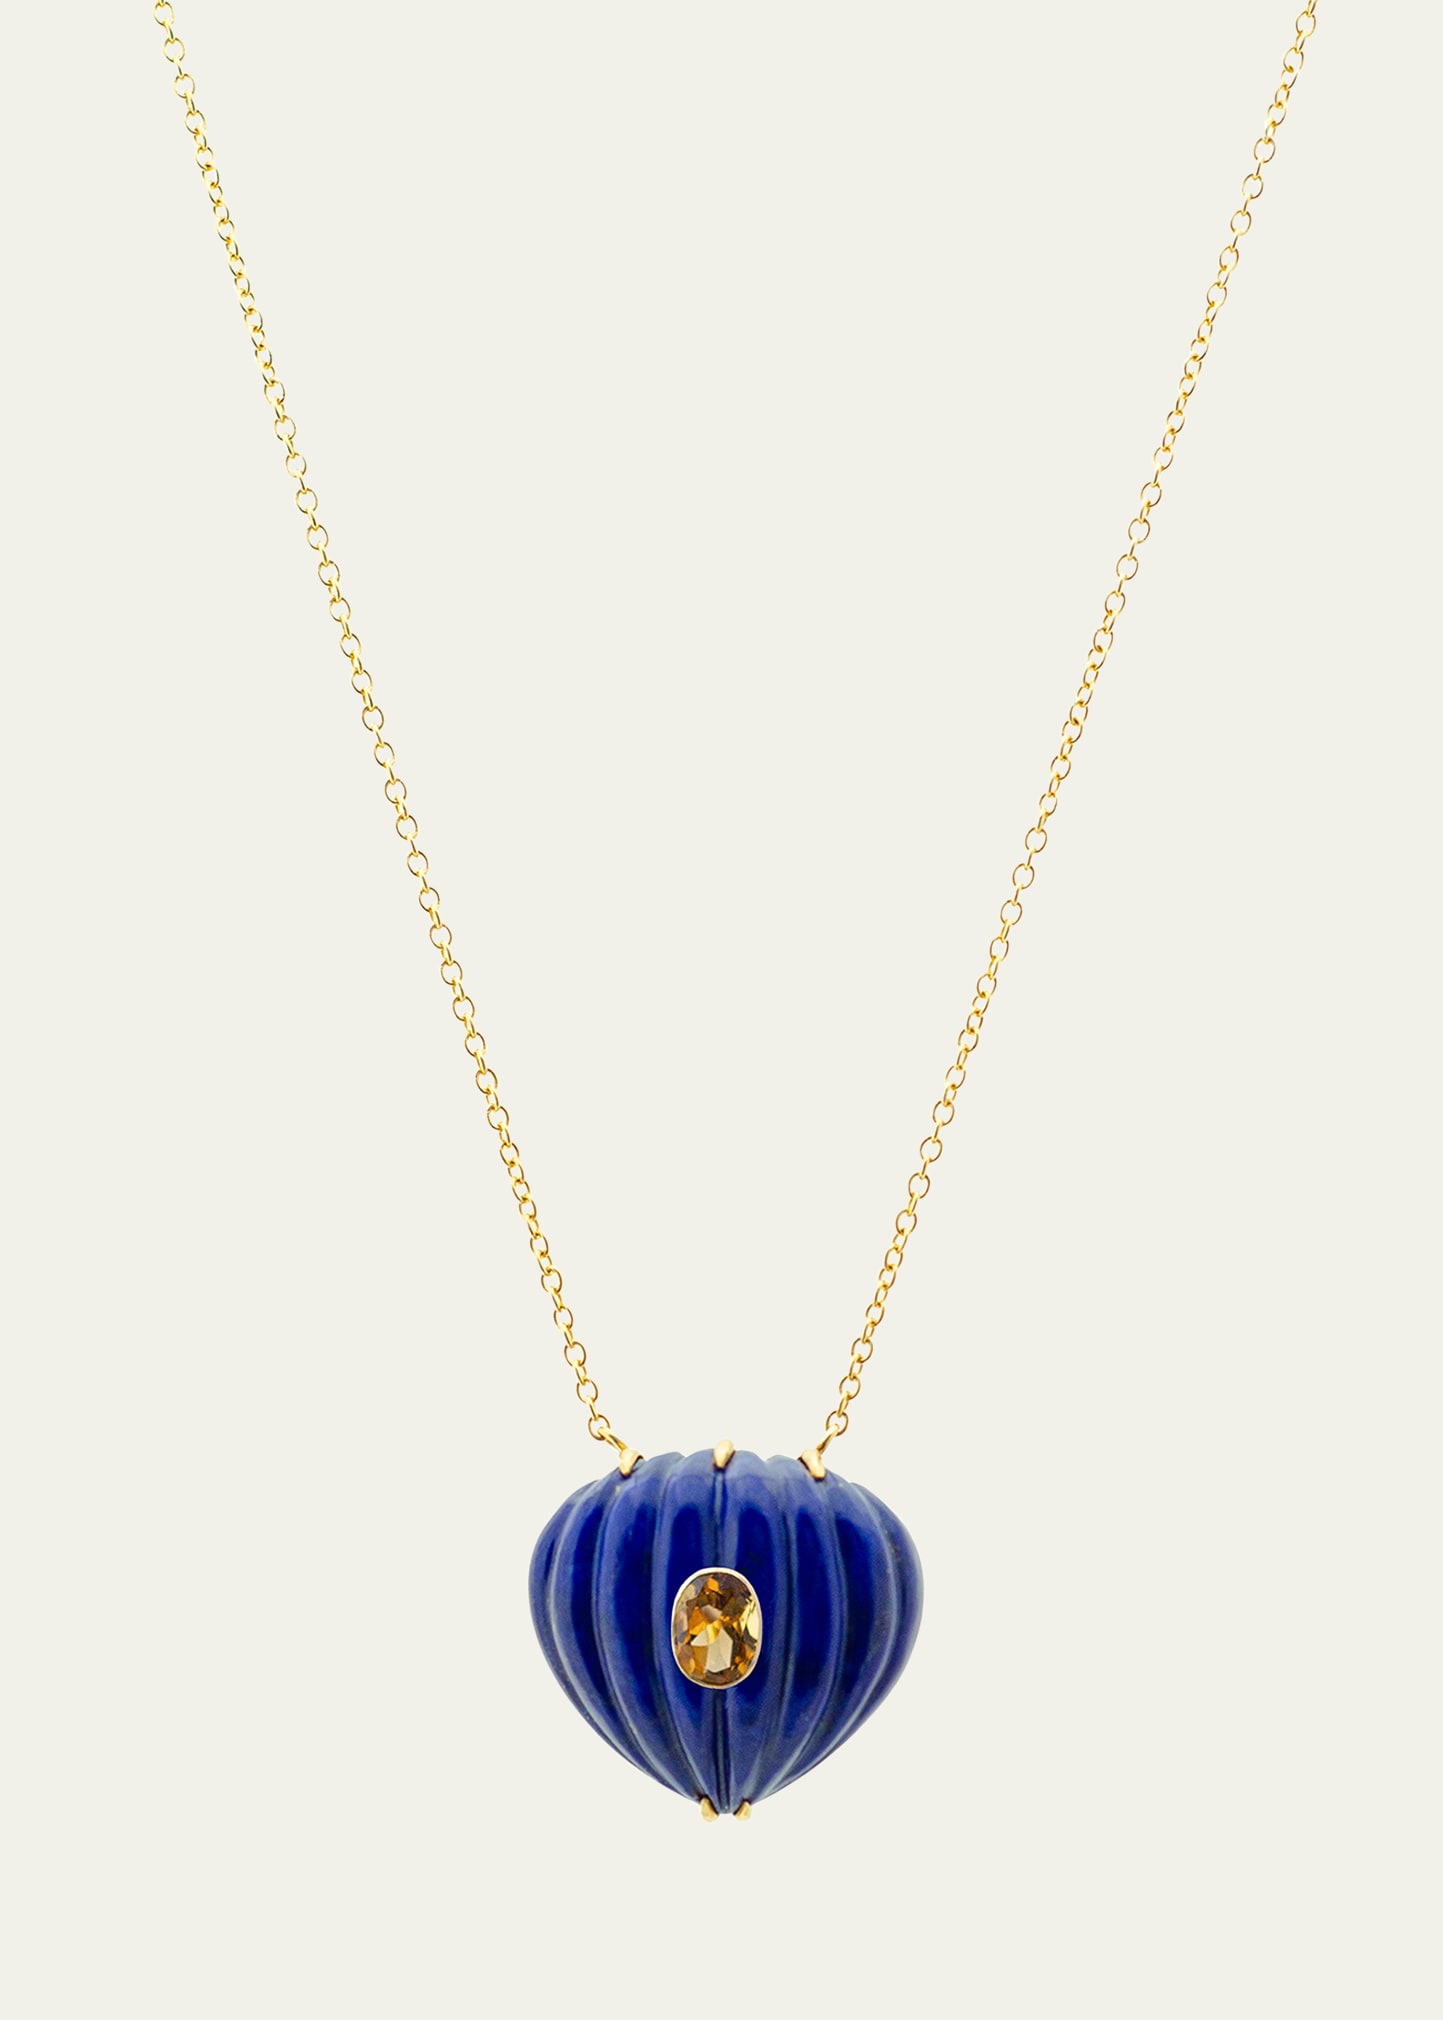 Lapis Lazuli and Citrine Carved Heart Necklace, 15"L